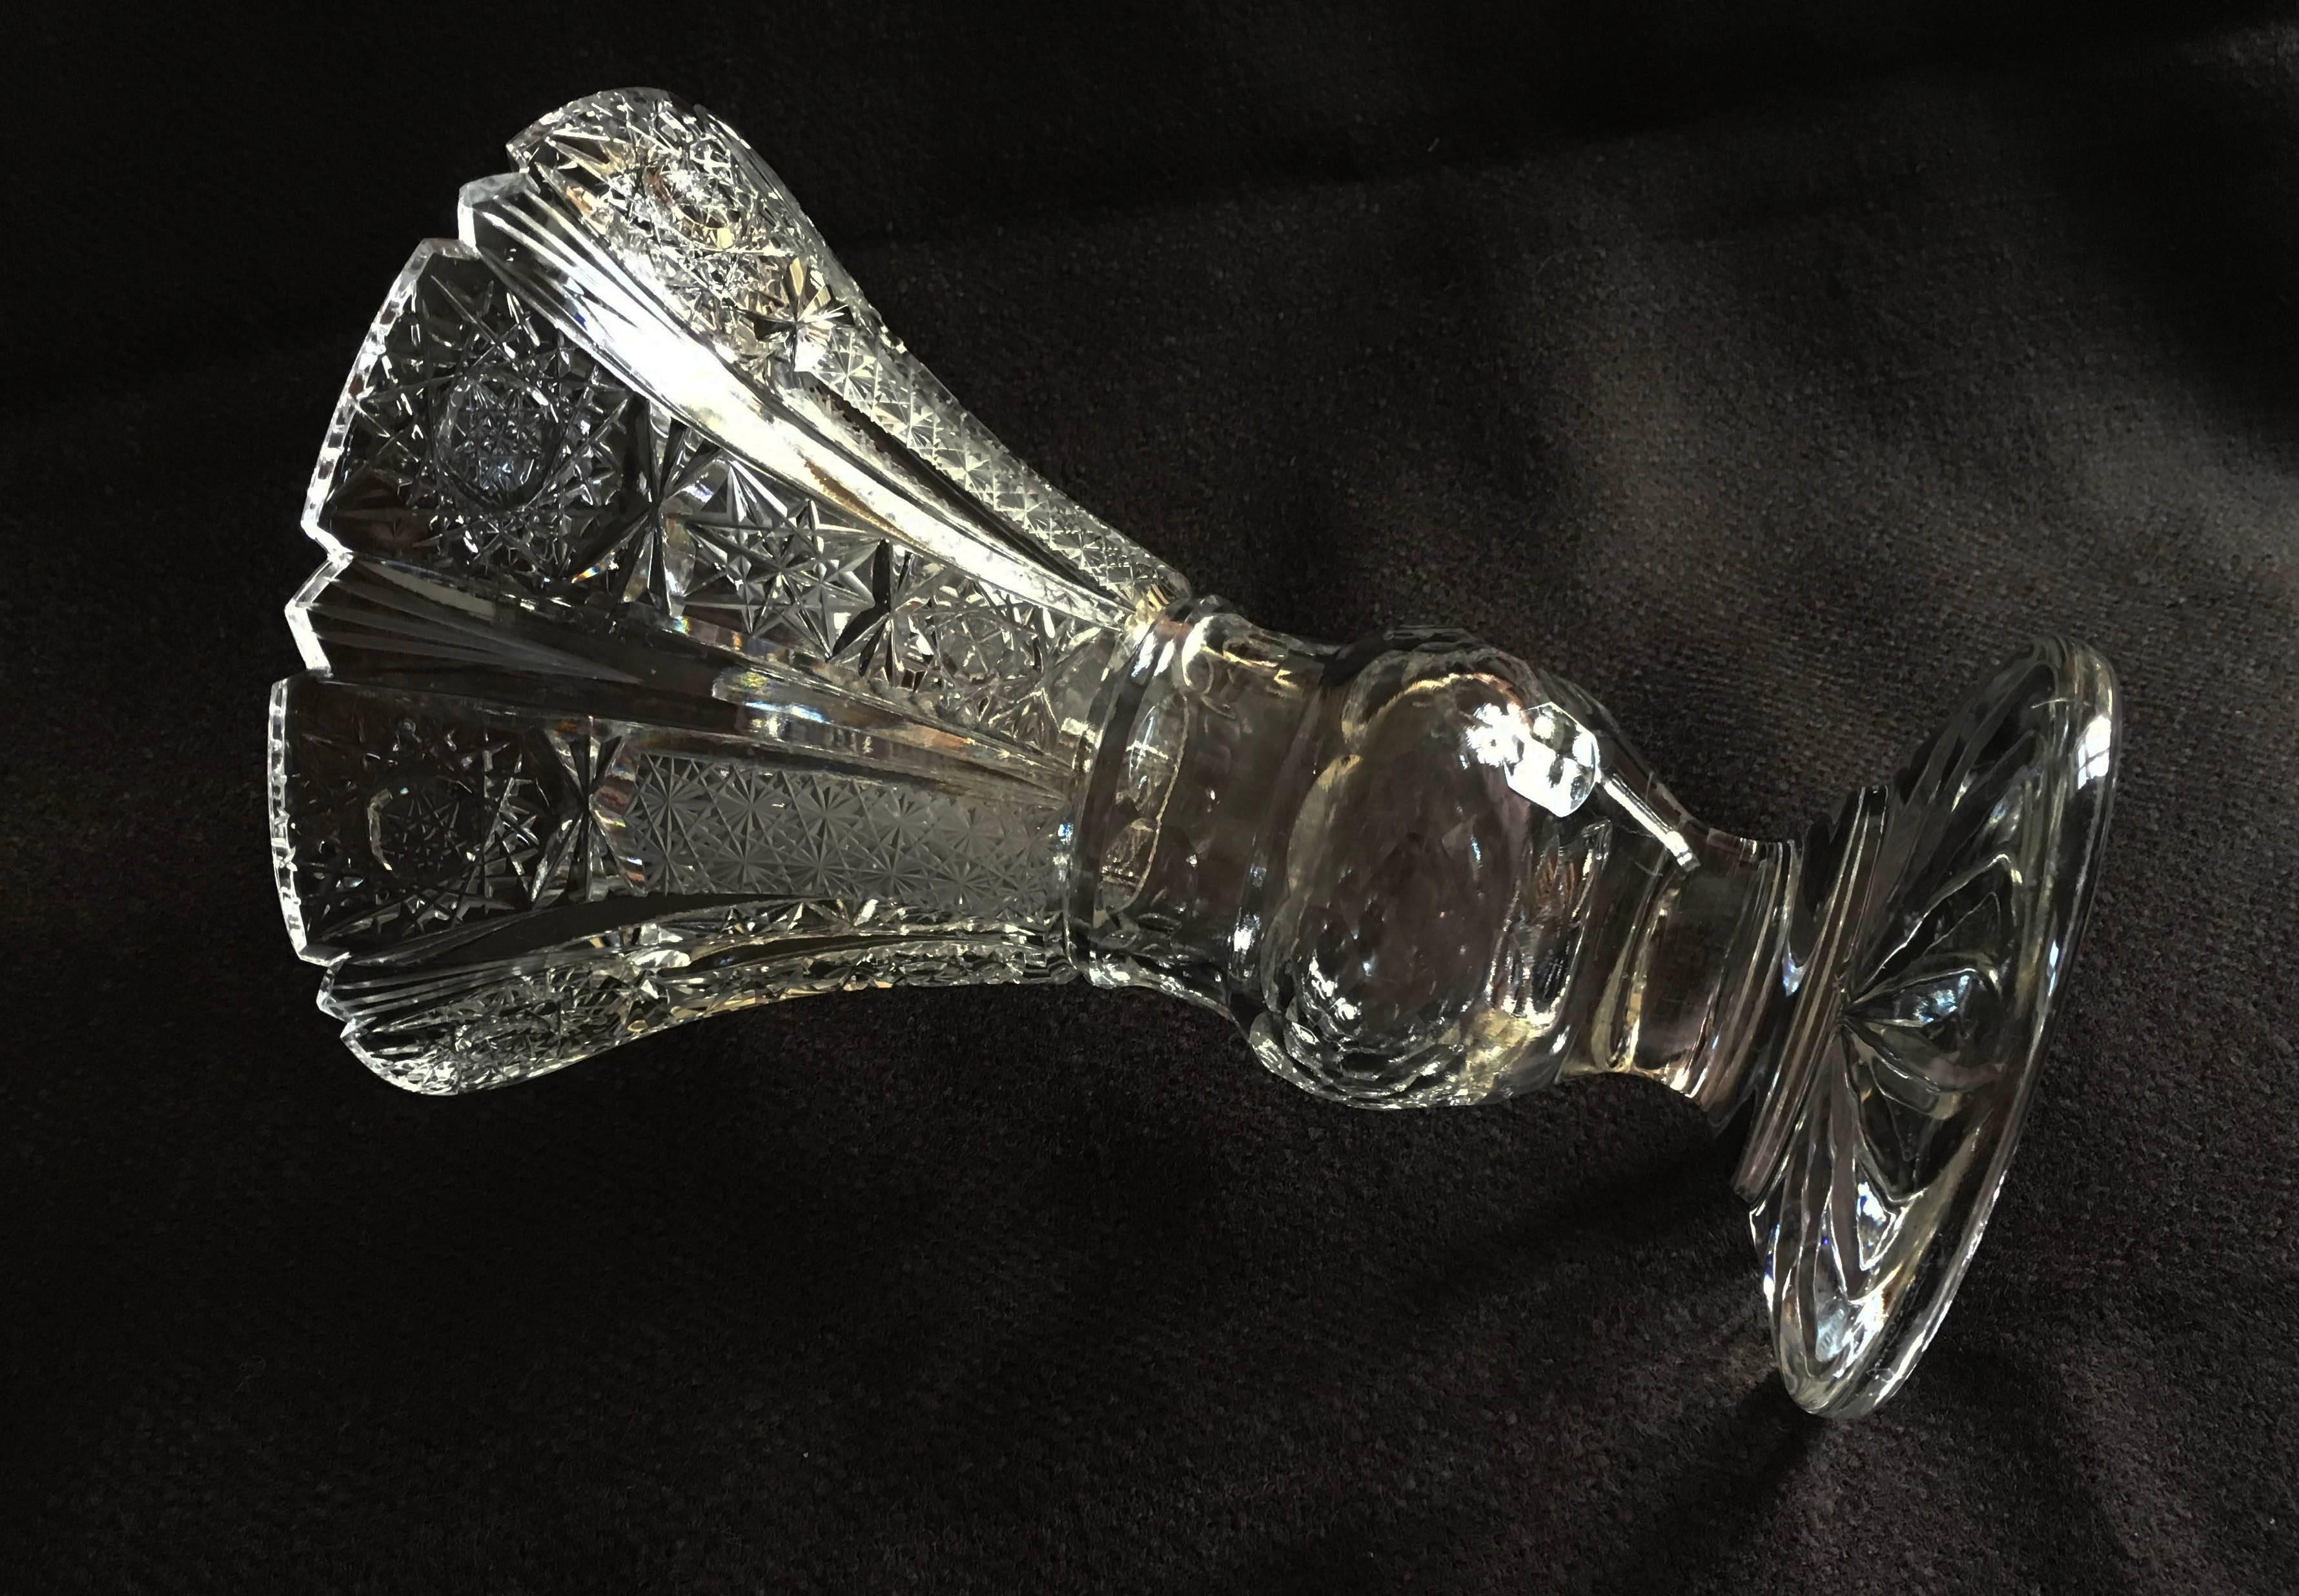 Extravagant cut and polished crystal flower vase made circa the 1970s in one of the Bohemian glass works. The cutting is especially fine and deep with the very intricate patterns.